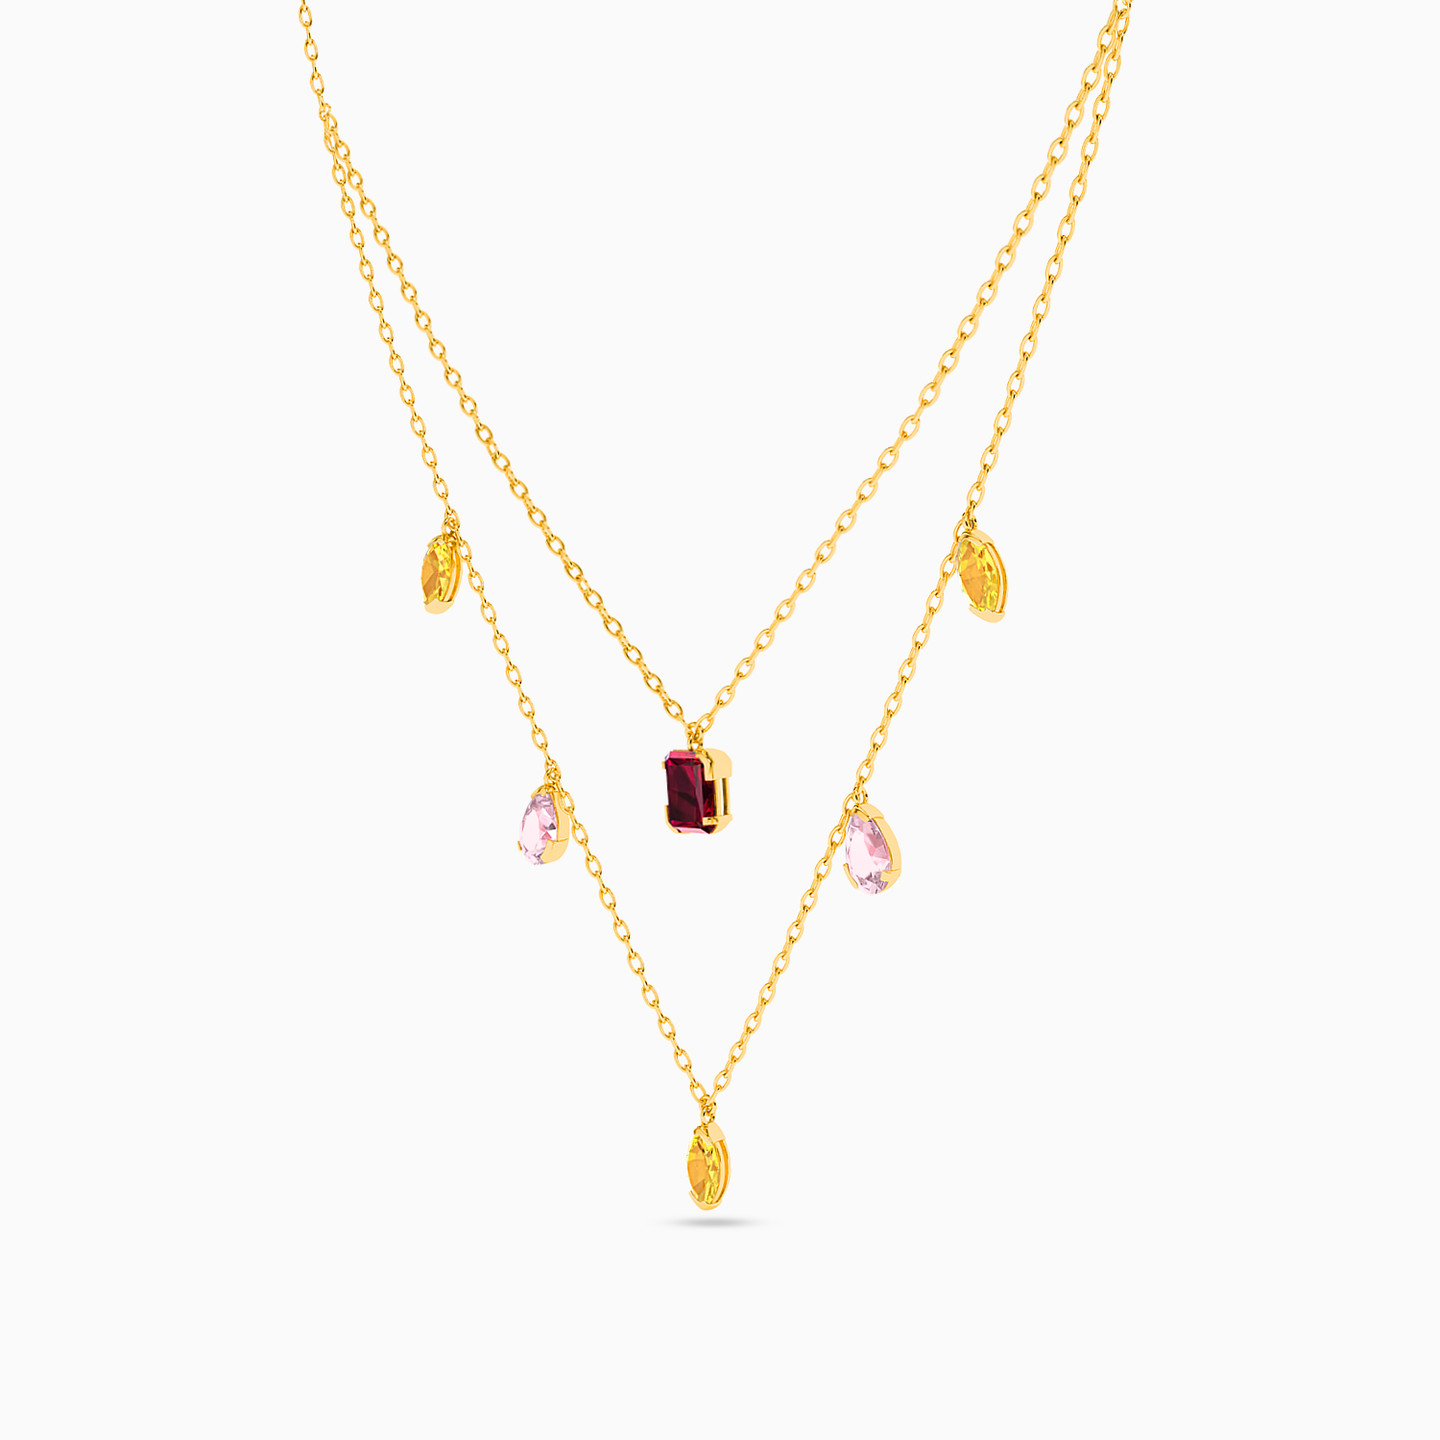 18K Gold Colored Stones Layered Necklace - 2